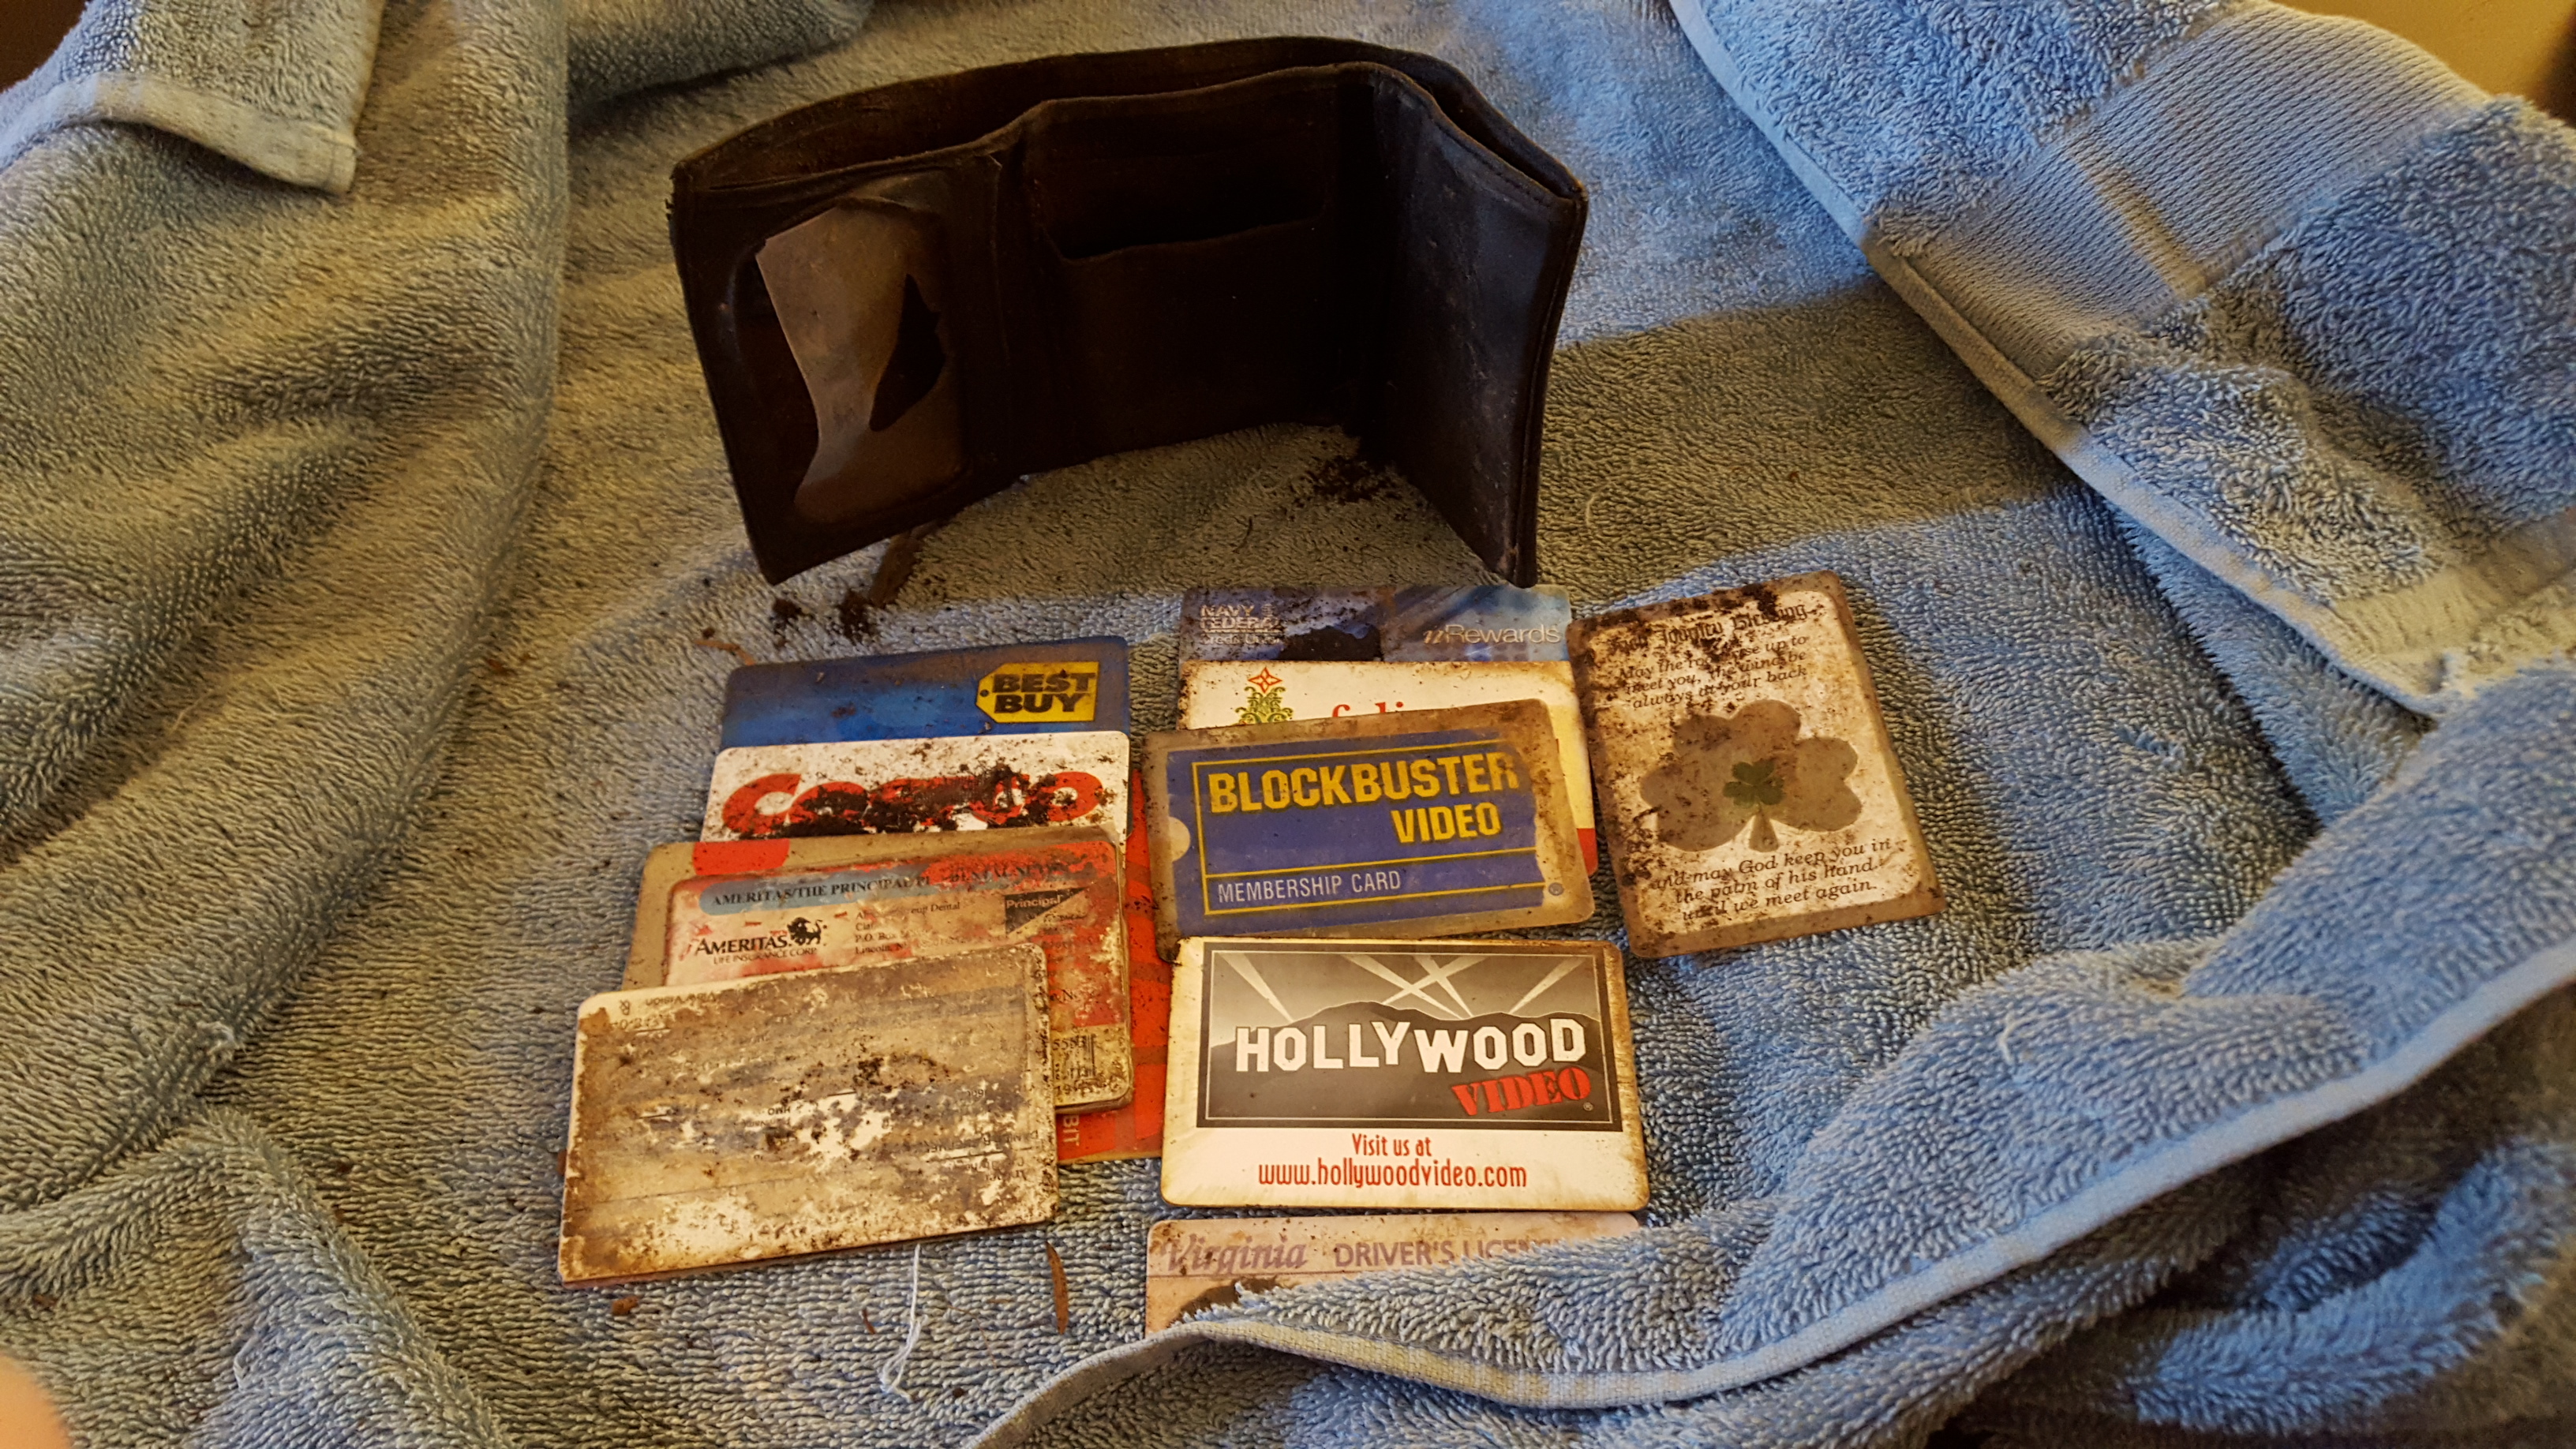 Returned wallet from 8 years ago